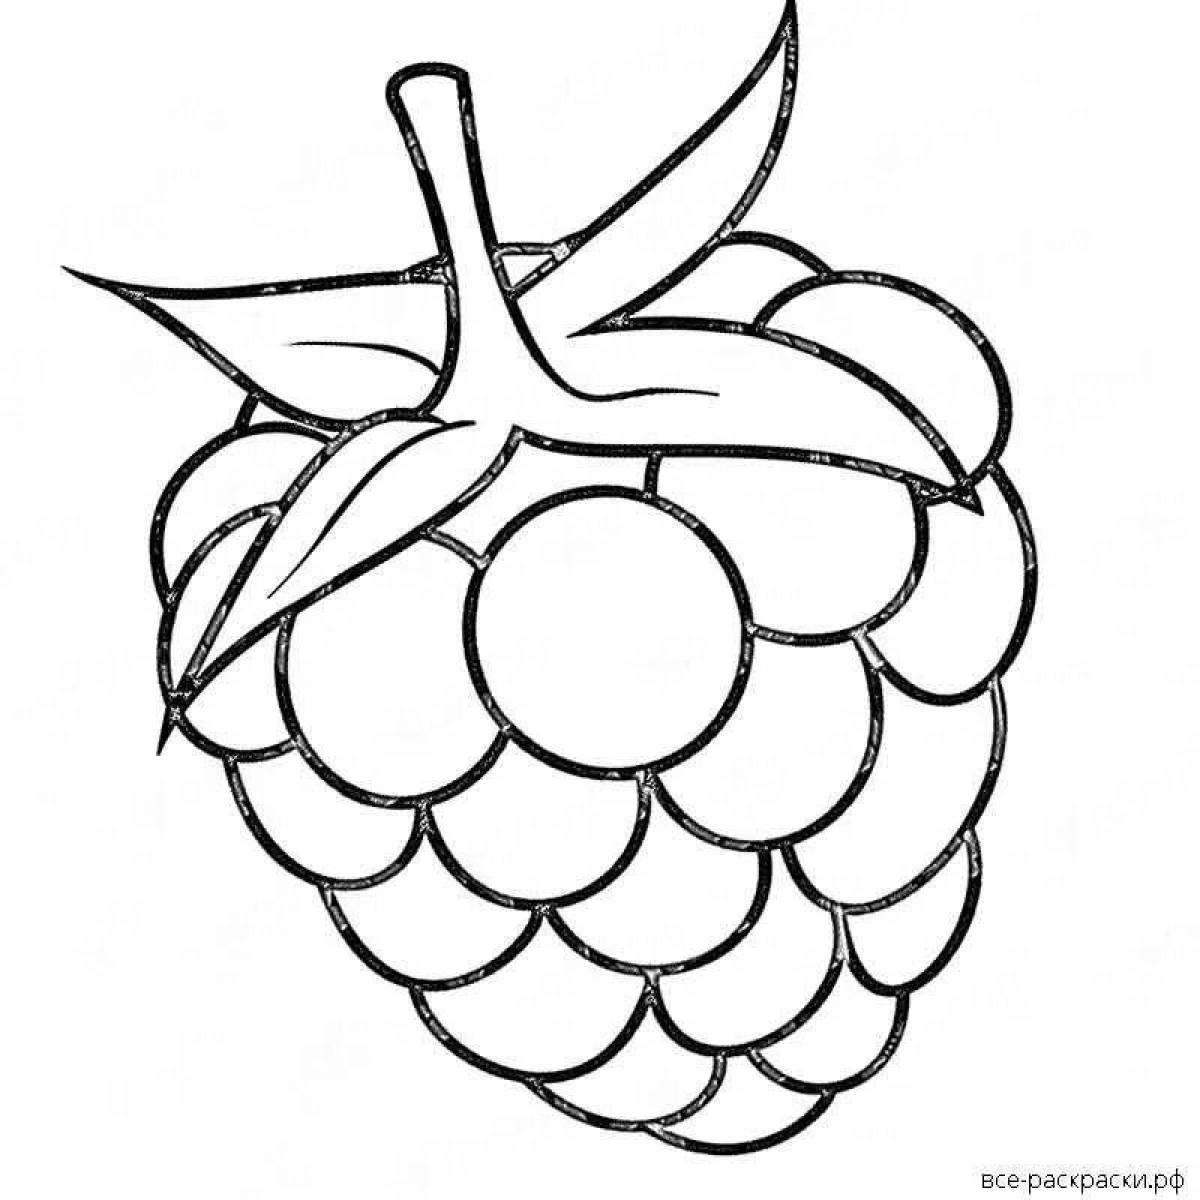 Glowing raspberry coloring page